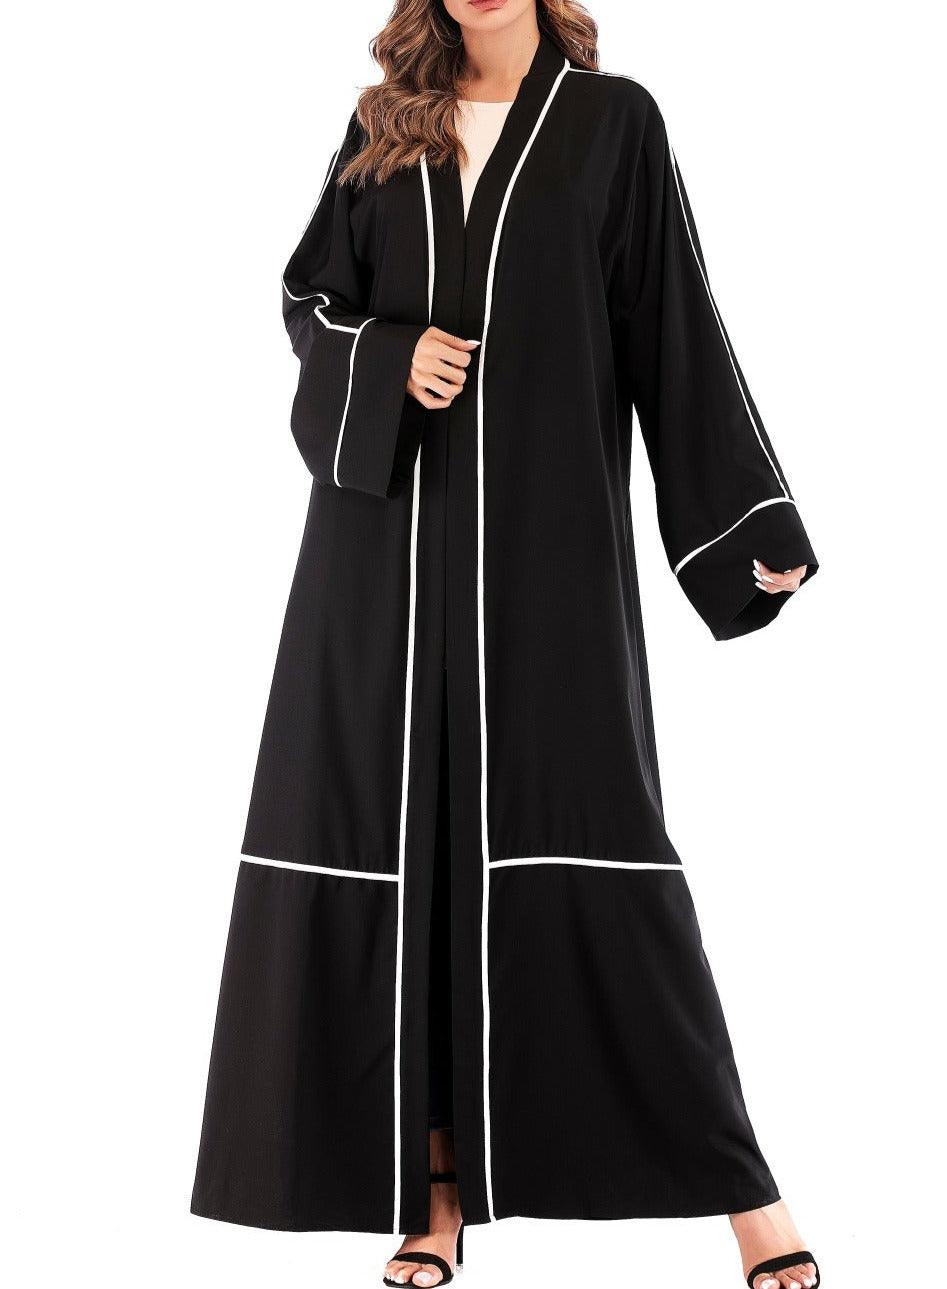 Contrast Striped Cardigan Muslim Robe - Try Modest Limited 